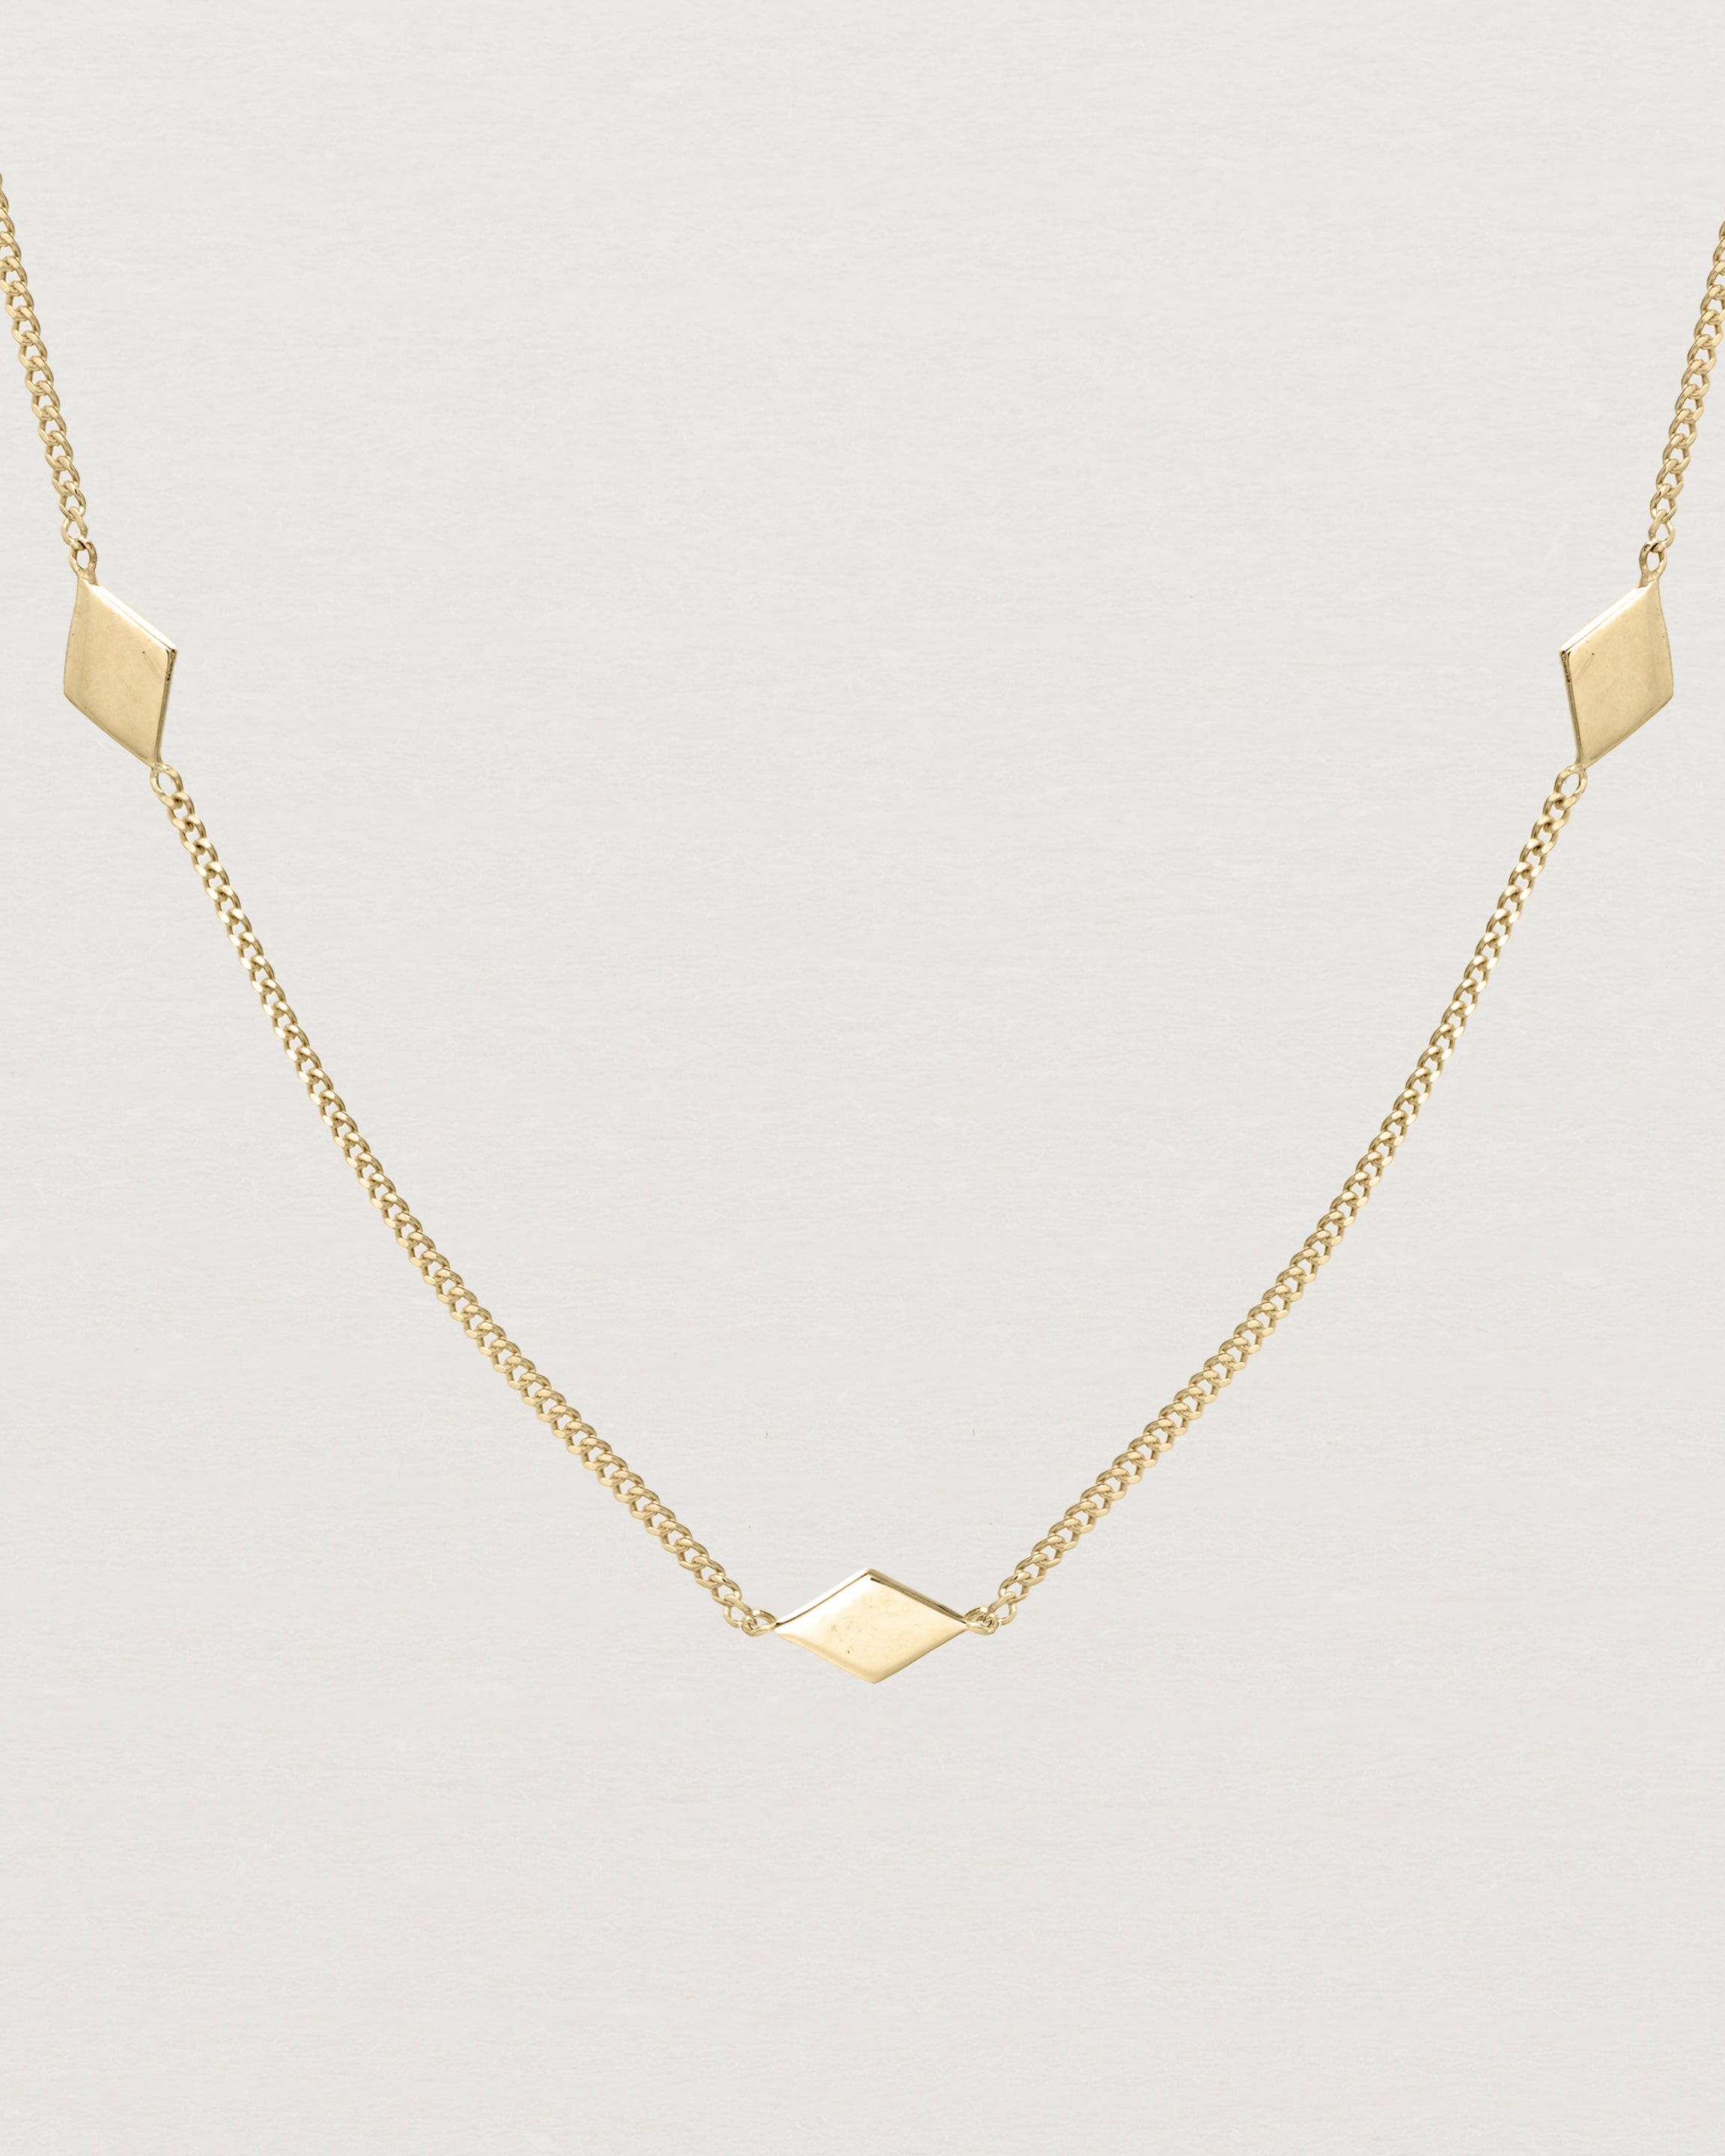 Close up view of the Nuna Charm Necklace in yellow gold.